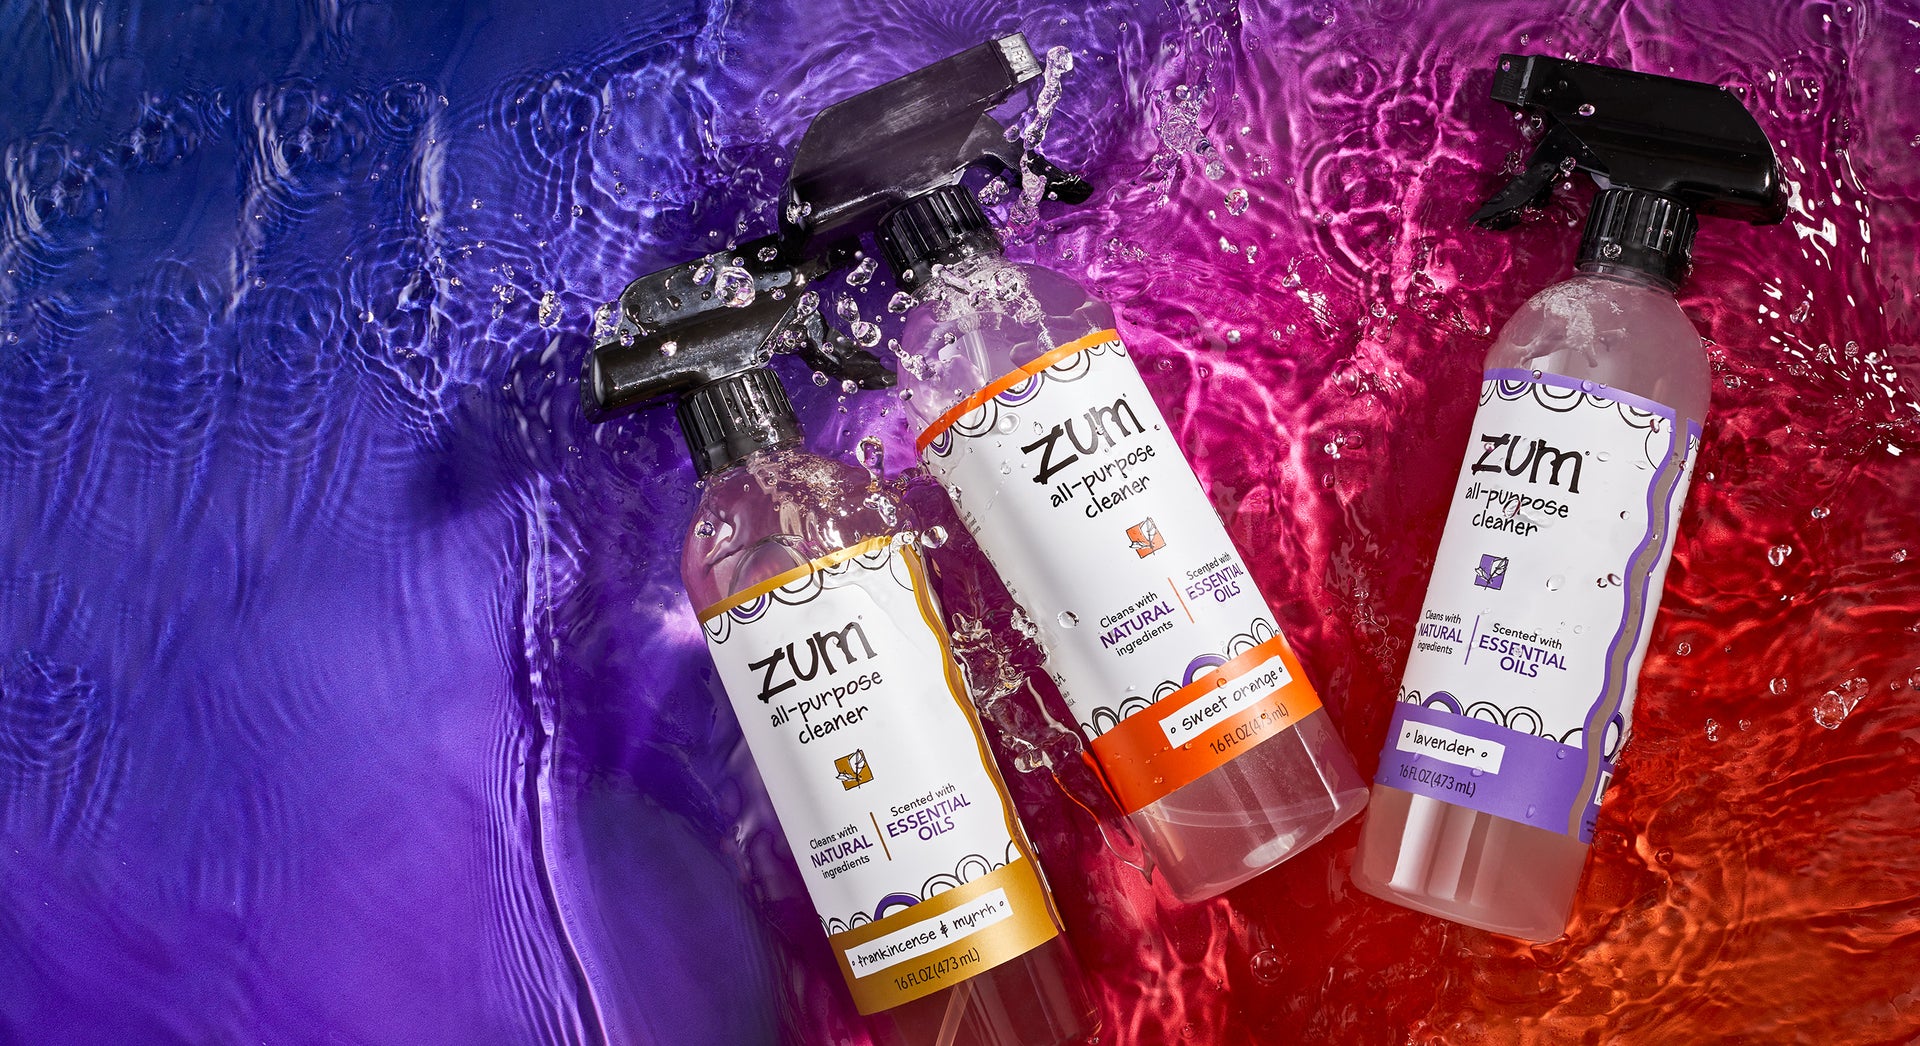 Frankincense & Myrrh, Sweet Orange, and Lavender scented bottles with sprayers of All-Purpose Cleaner. The three bottles are laying in a bed of water with splashes all around. Blue to purple to orange gradient background.